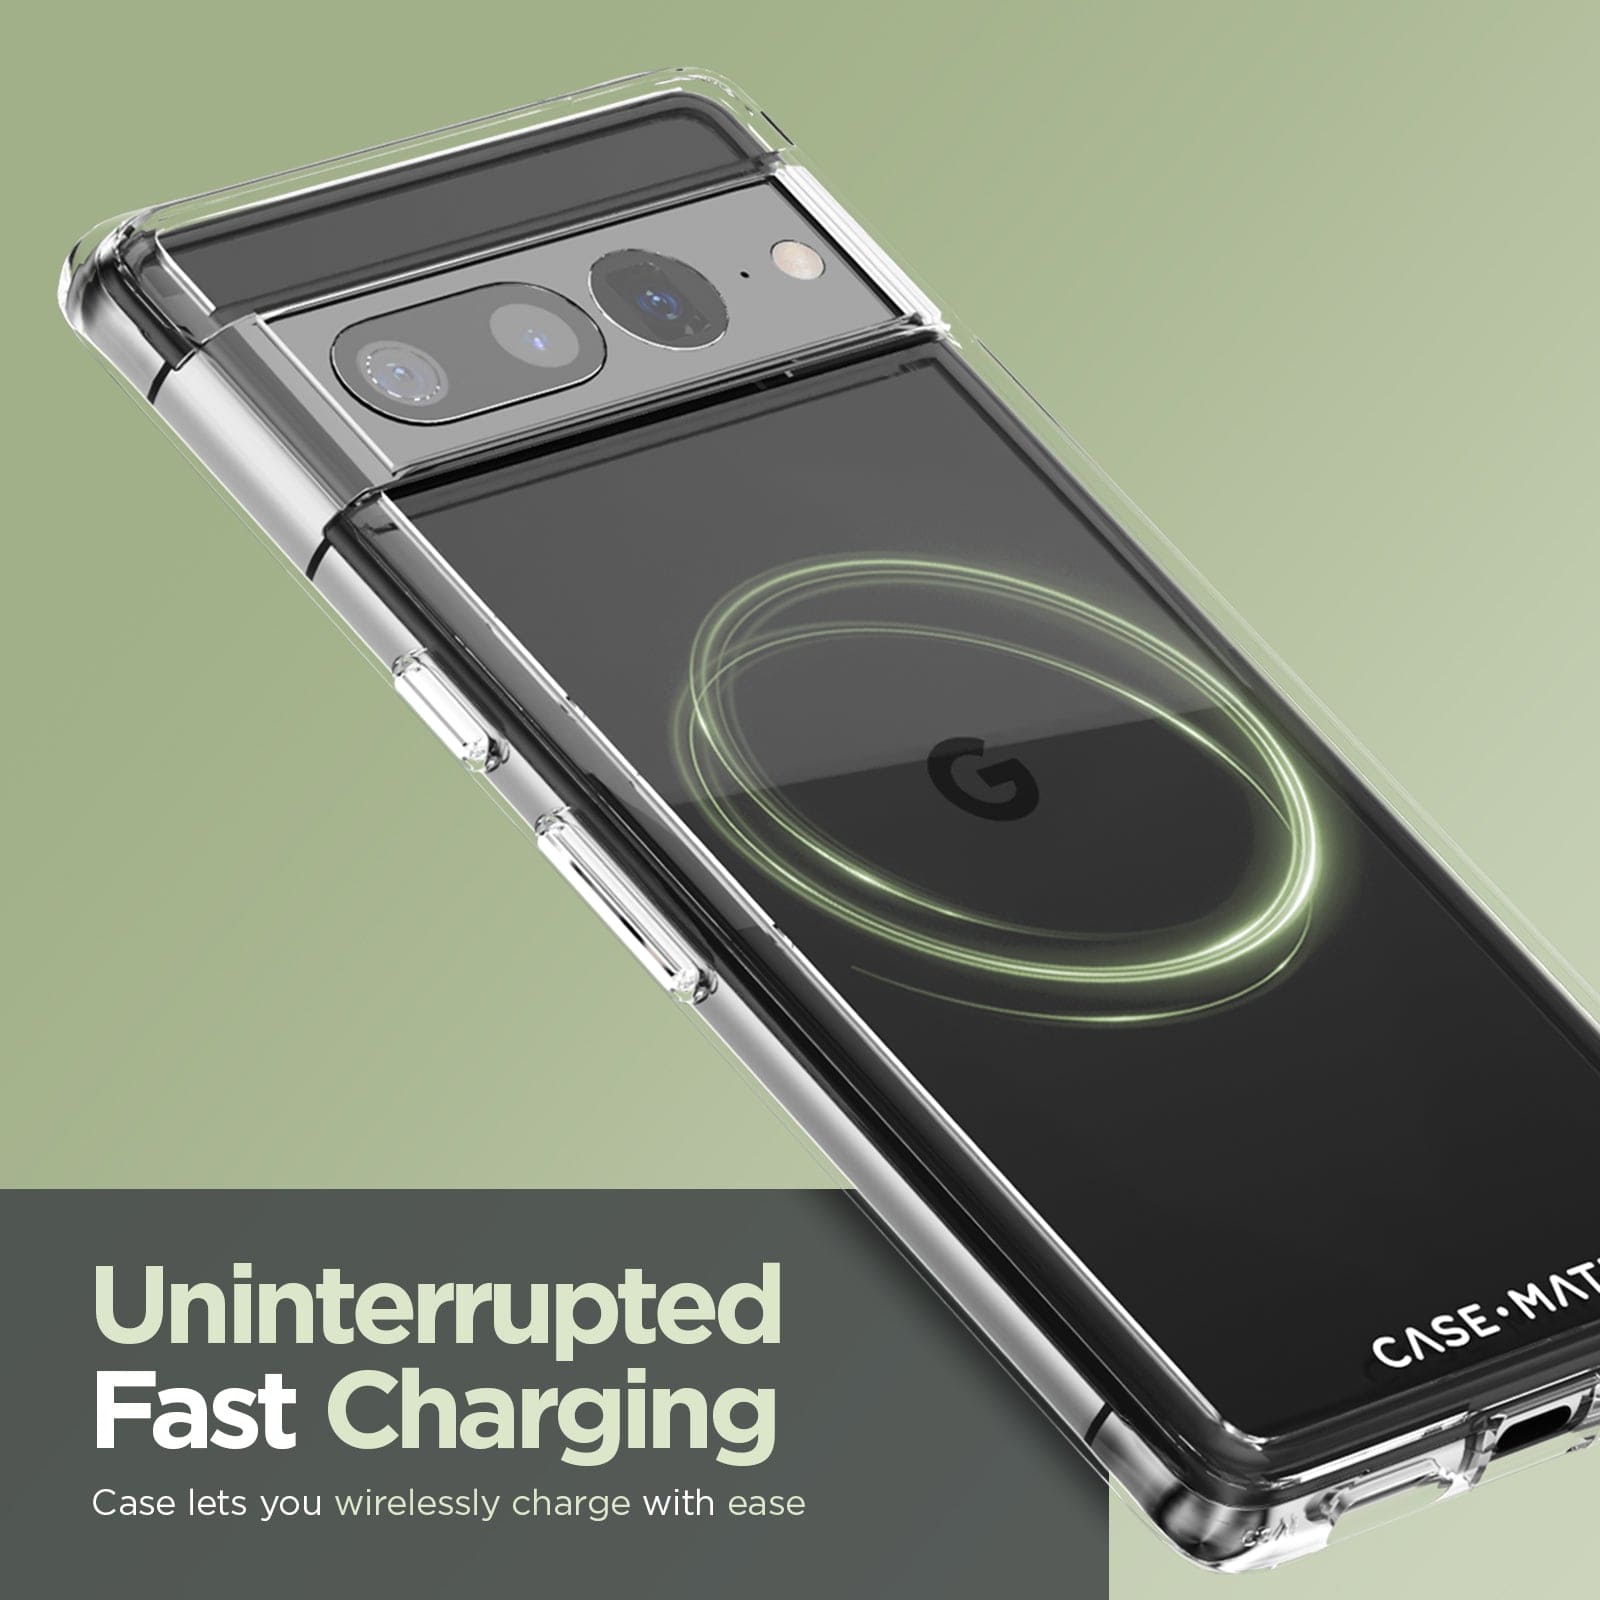 Uninterrupted Fast Charging. Case lets you wirelessly charge with ease